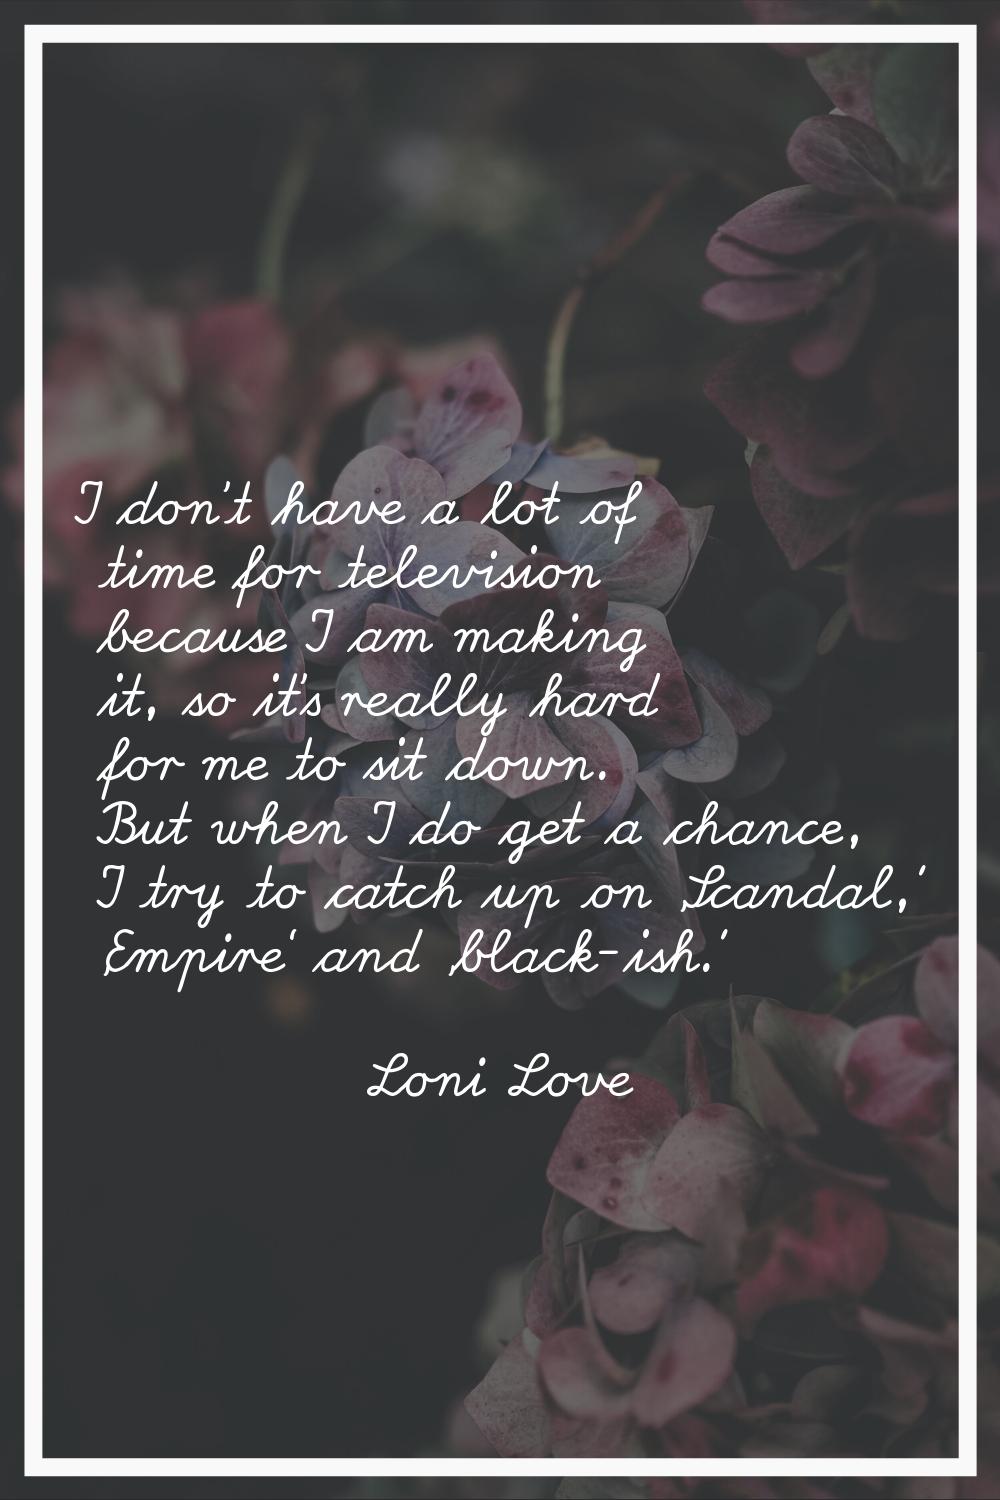 I don't have a lot of time for television because I am making it, so it's really hard for me to sit